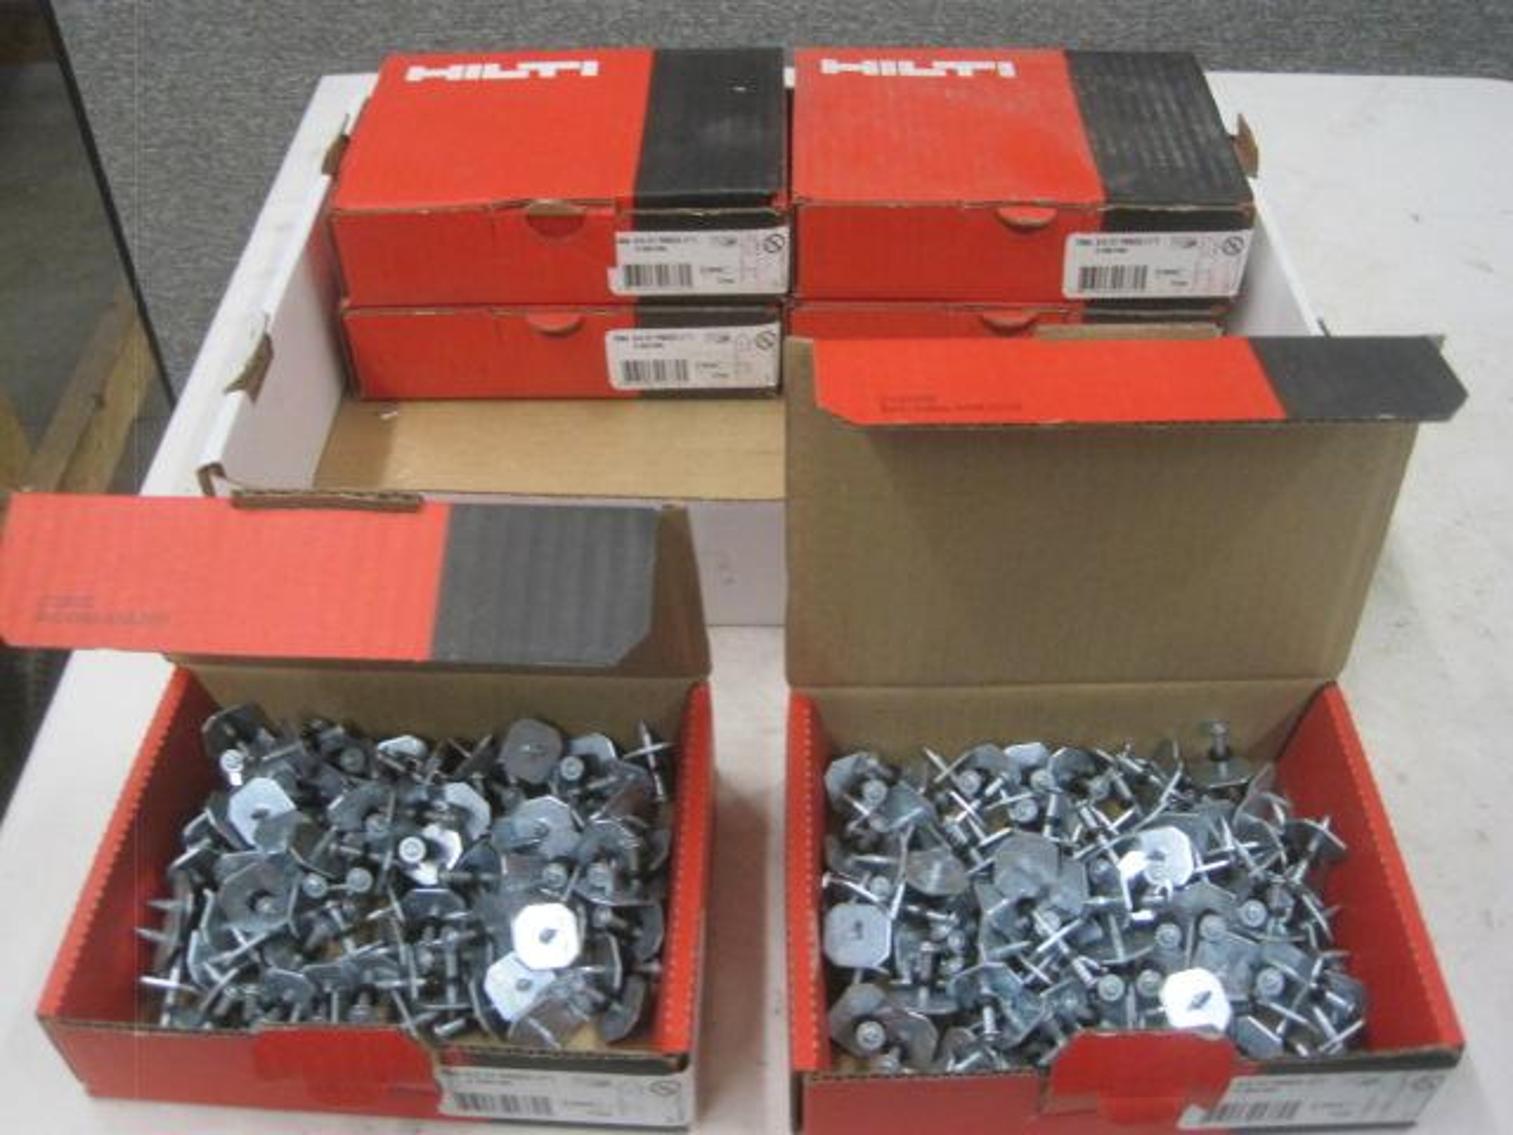 Hardware Auction: Nuts, Bolts, Screws, Anchors